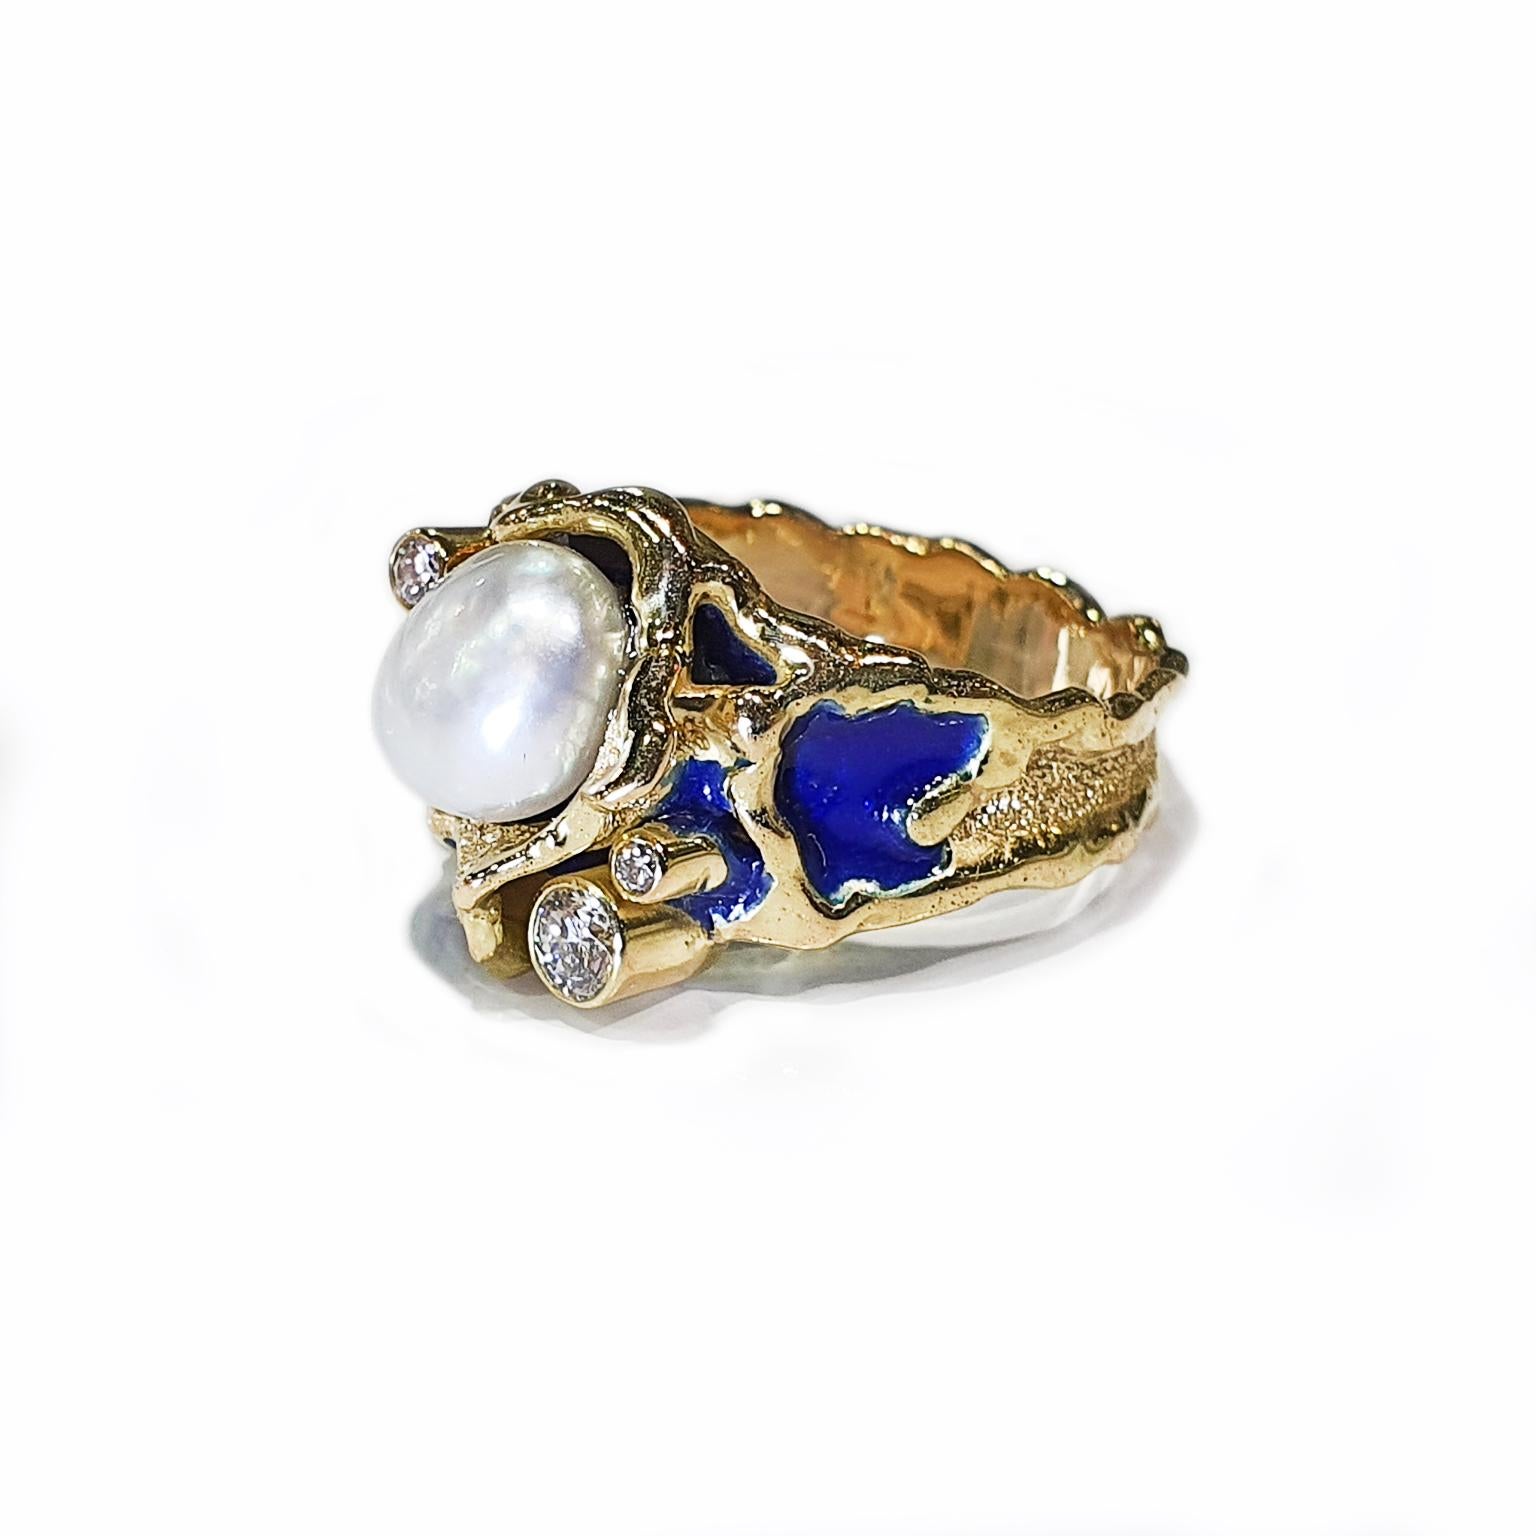 Paul Amey’s signature molten edge Broome pearl ring was crafted from 18K yellow gold with hard “glass” deep blue enamel. Note: this enamel is not acrylic. There are 3 round white diamonds randomly set in the design, being a 15pt, a 5pt and a 2pt.